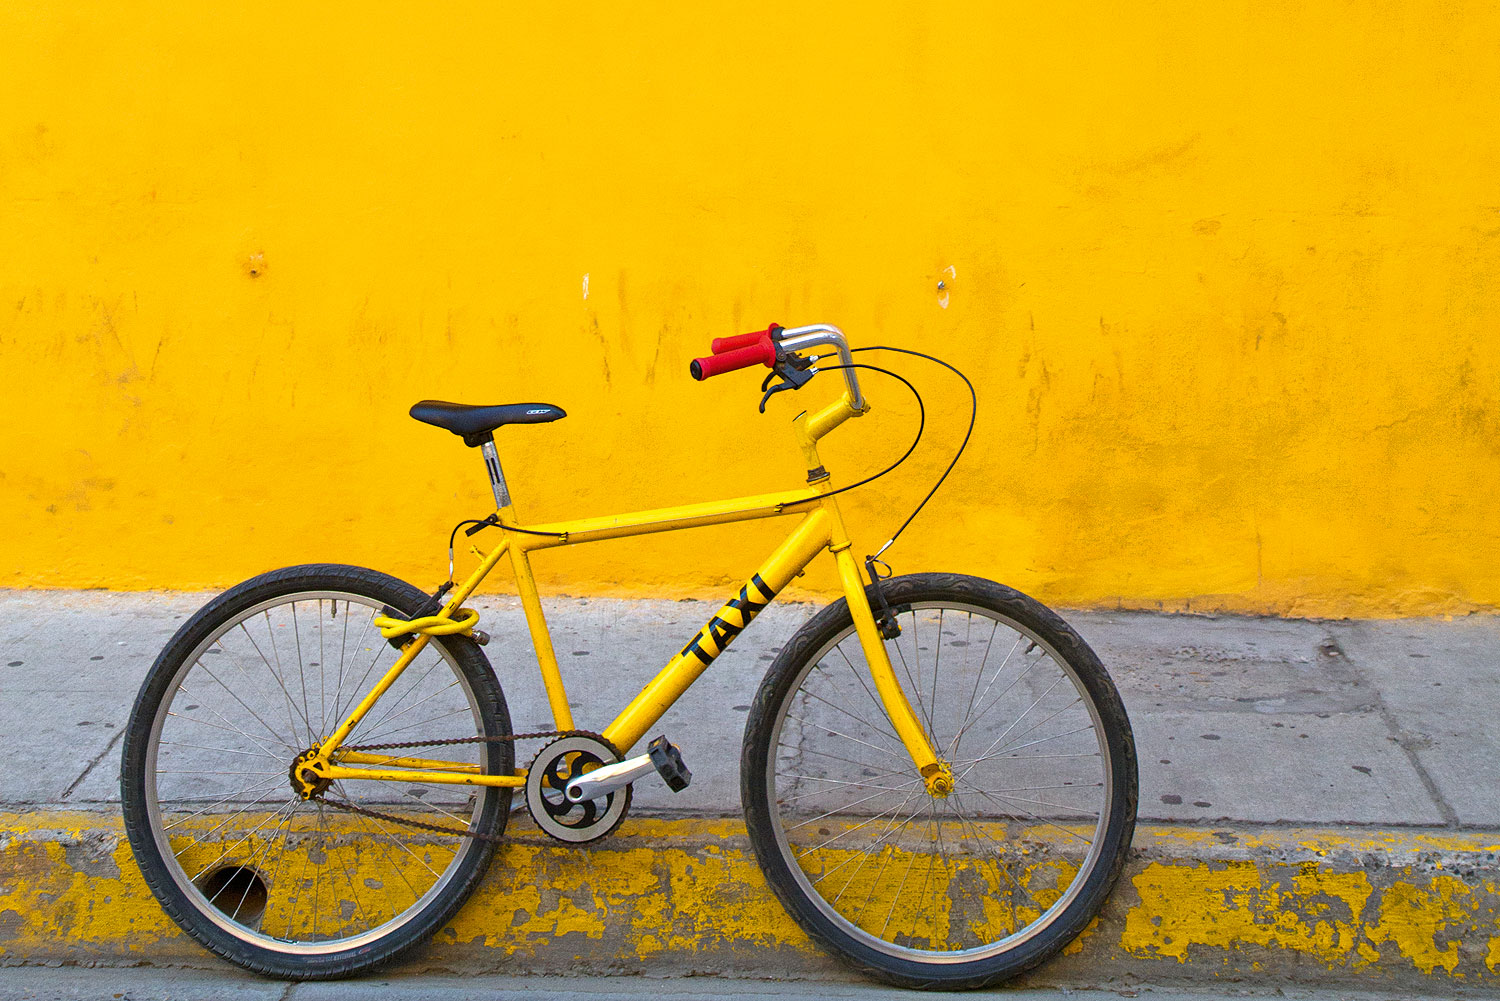 Catching a taxi takes pedal power in Cartagena.